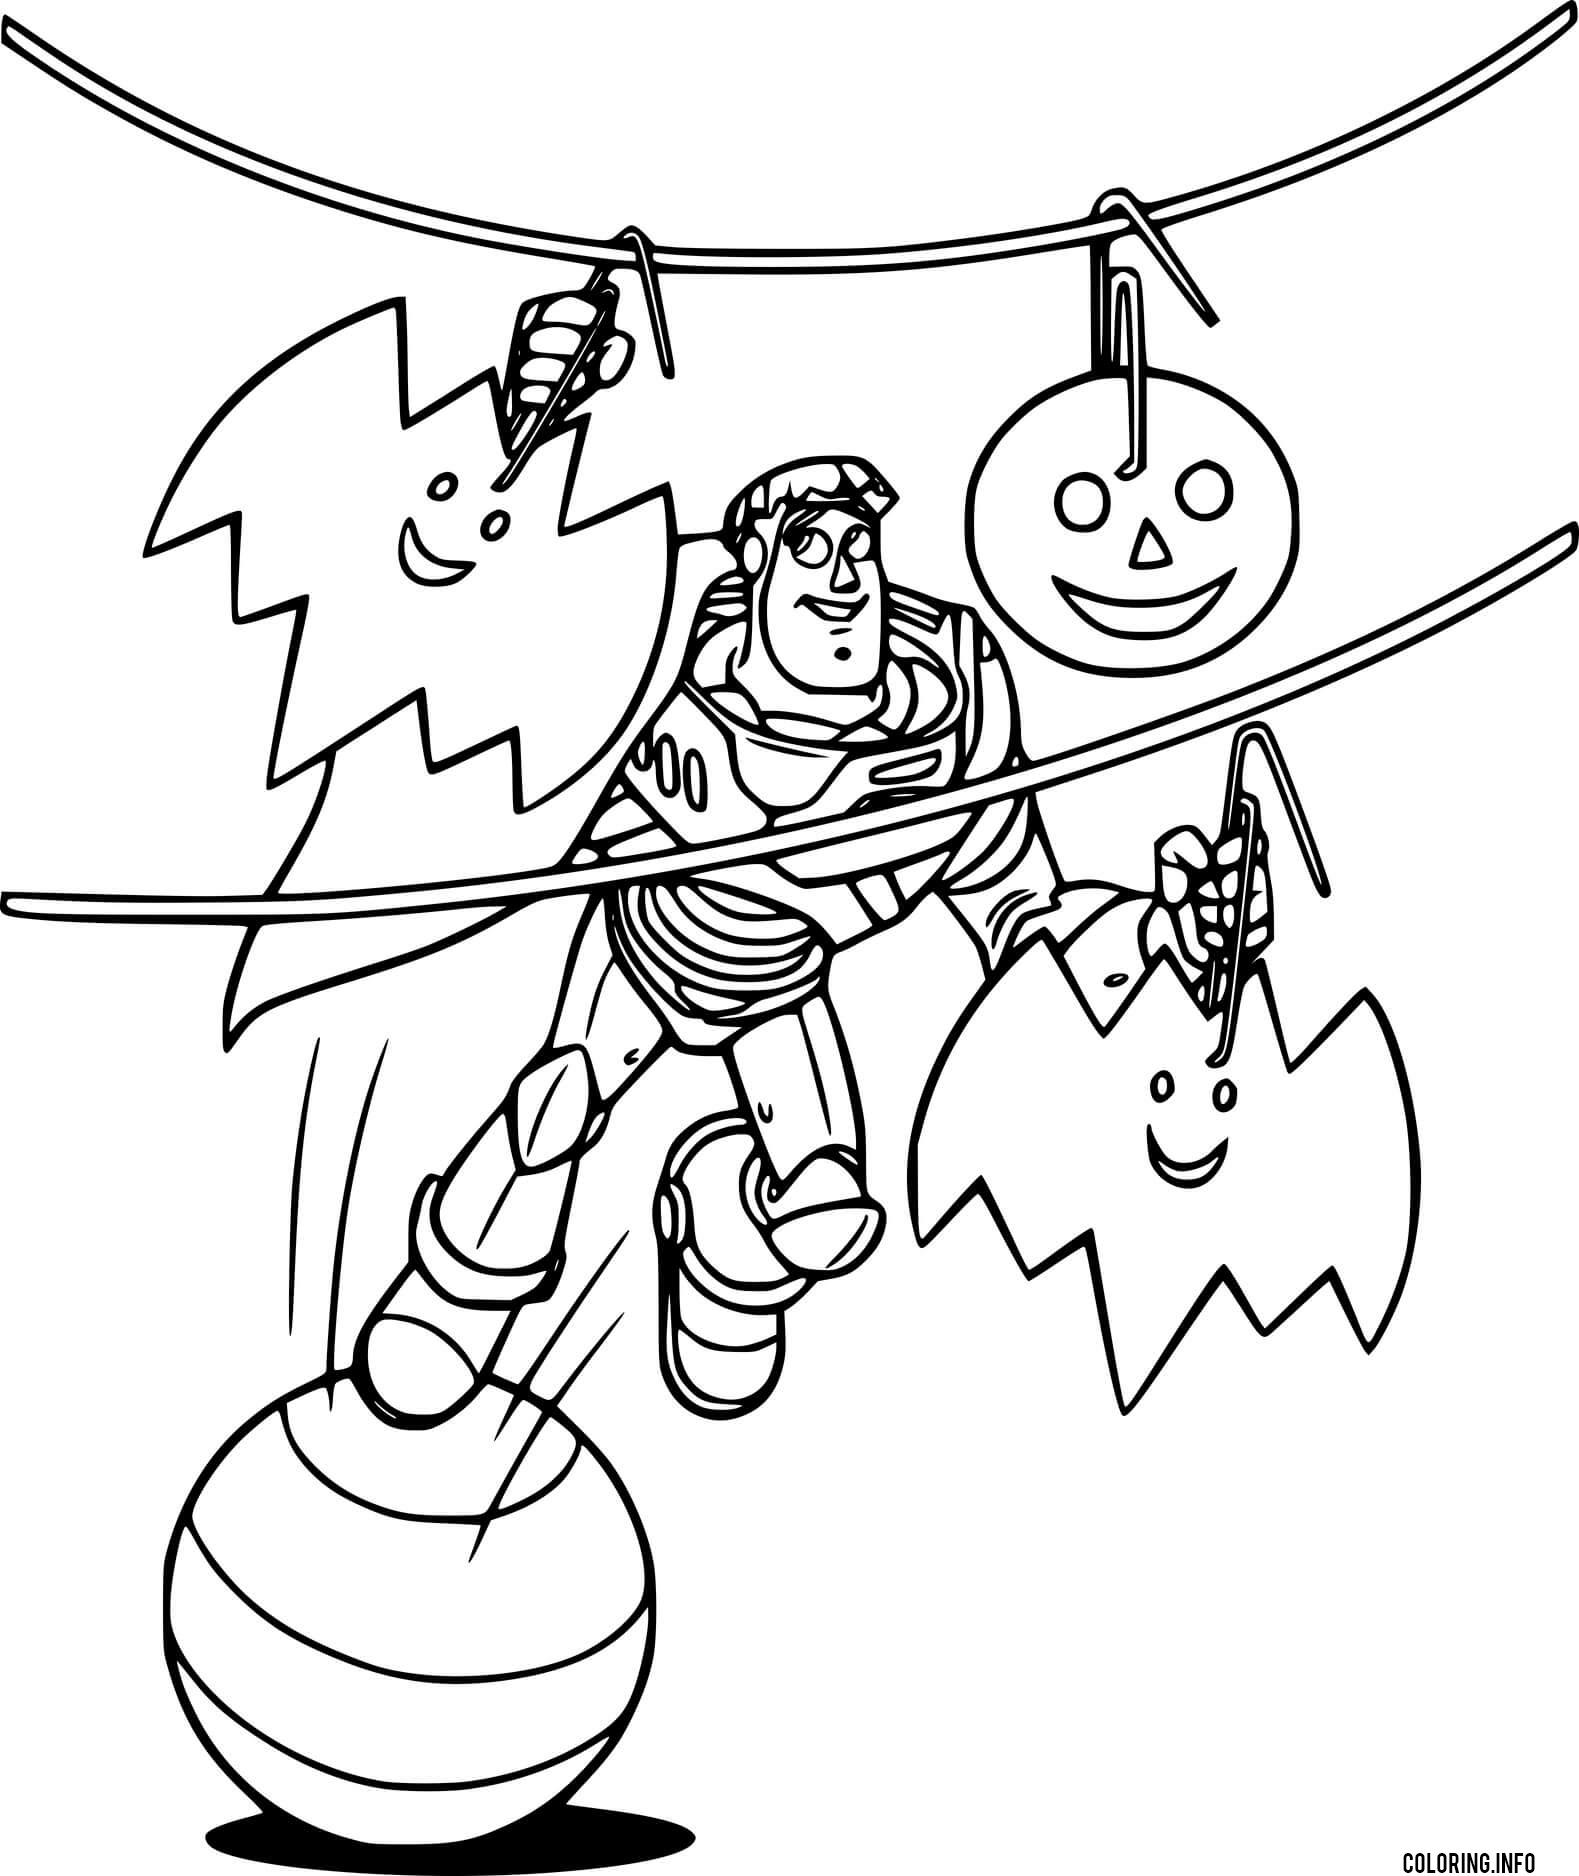 Buzz Lightyear At Halloween coloring